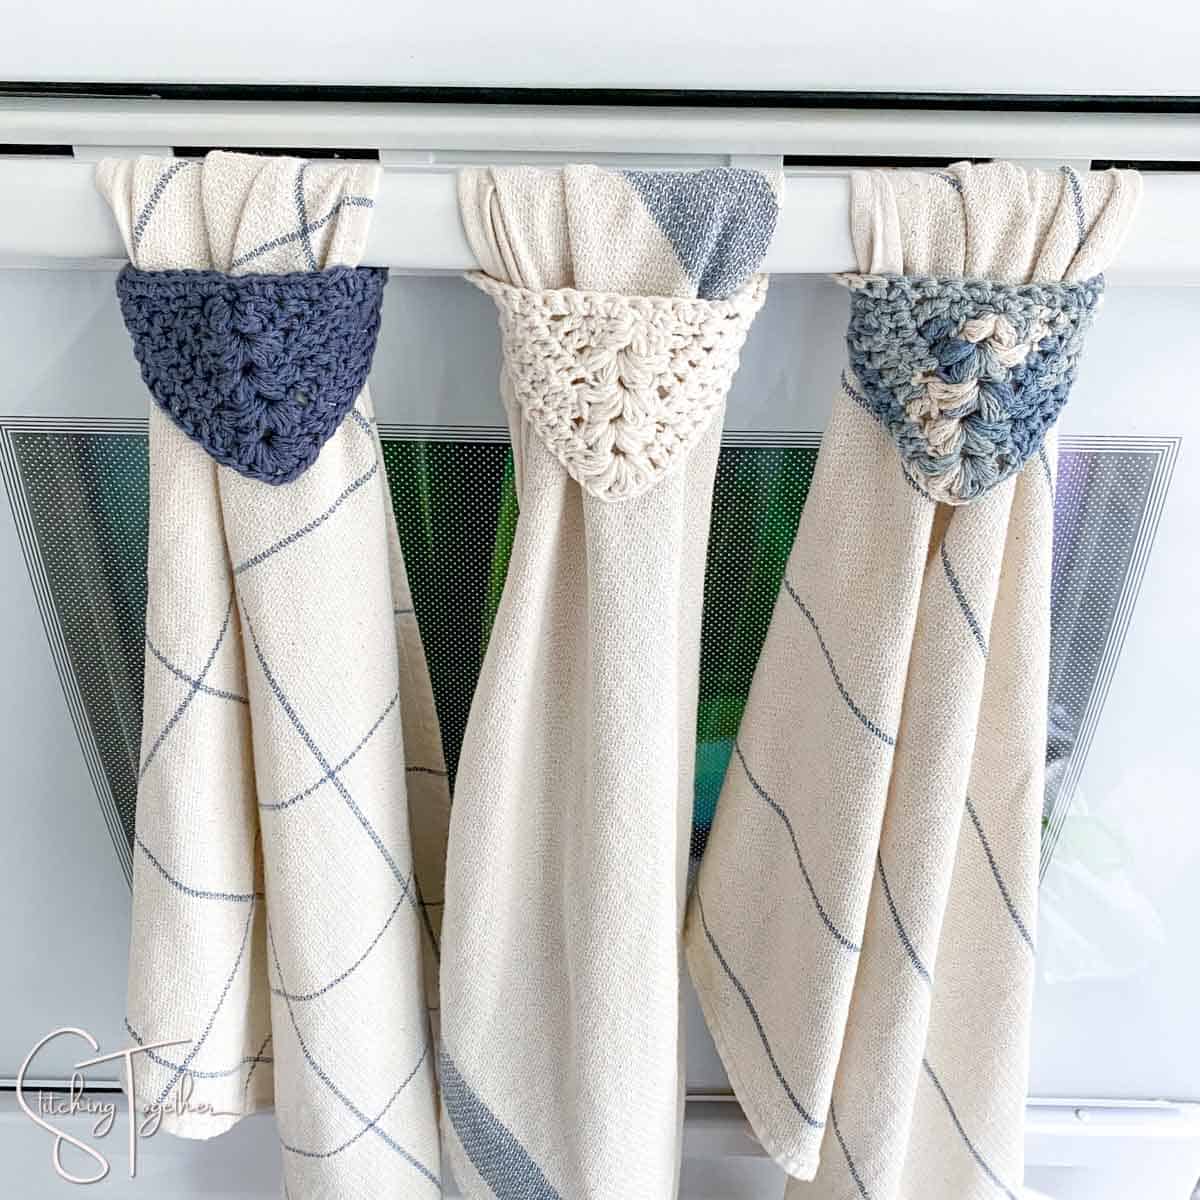 3 dishtowels hanging on an oven by crochet towel hangers